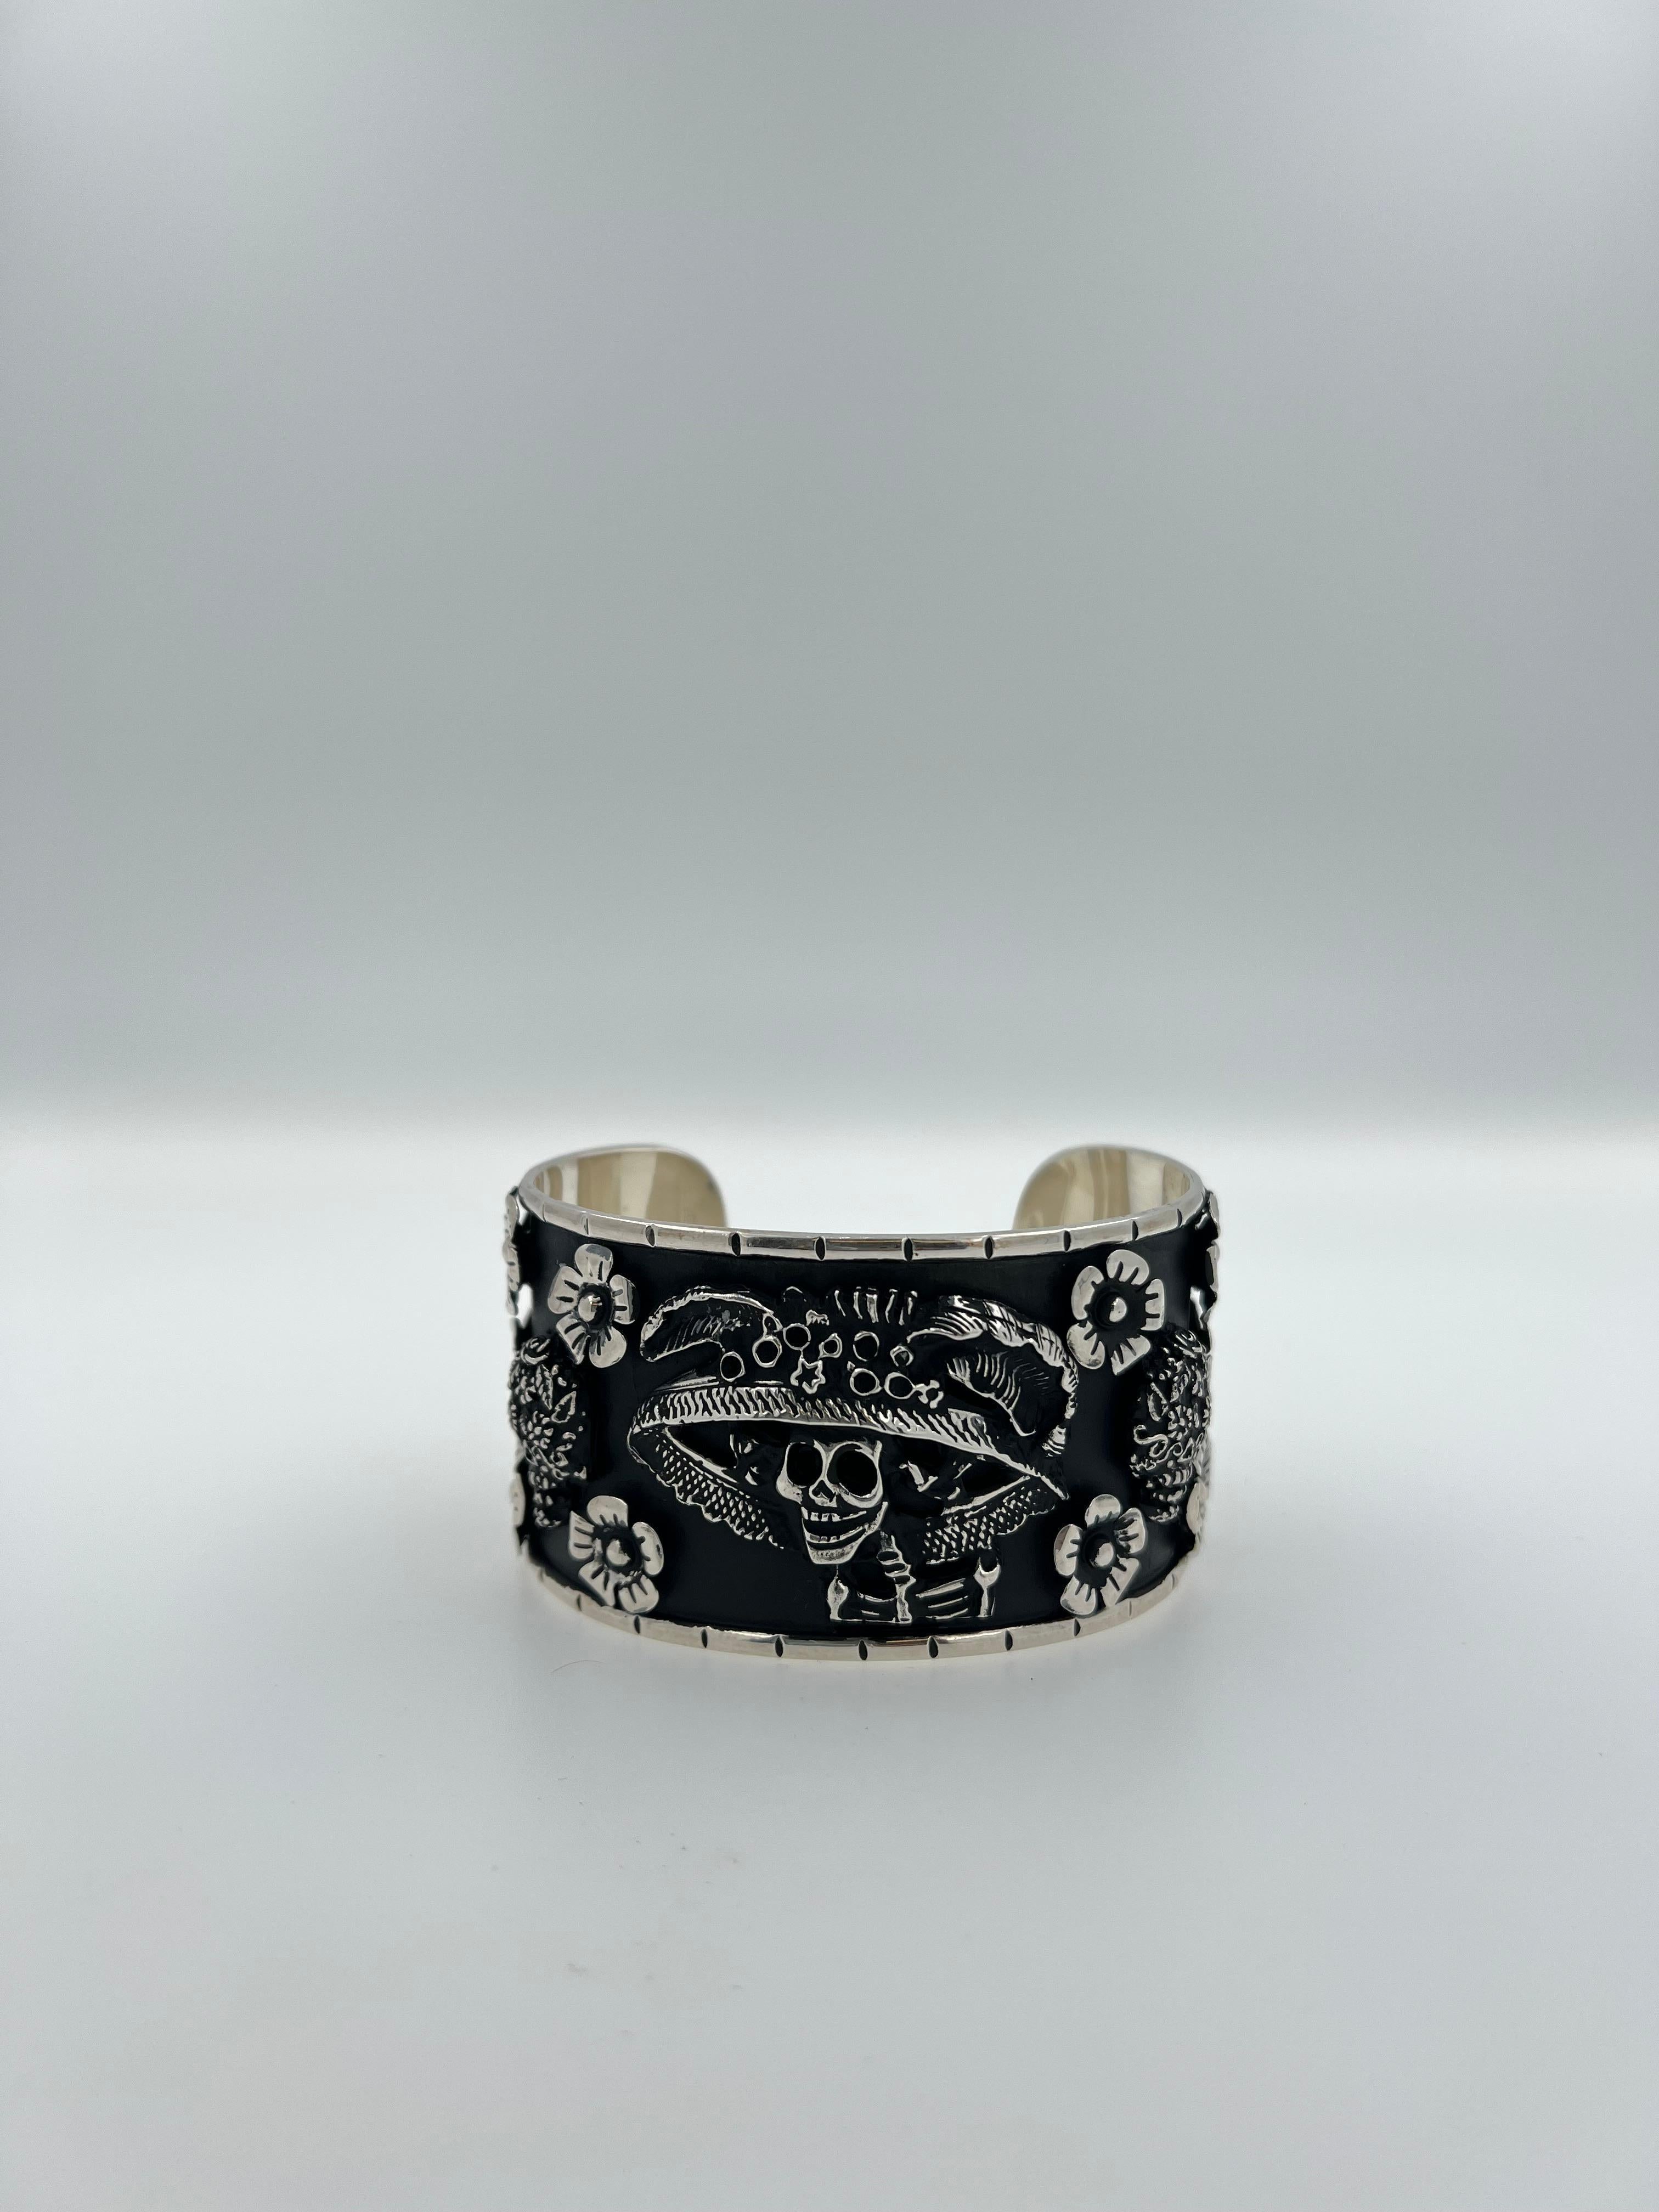 Pirate Flower Black Goth Art Hardy 925 Sterling Silver Wide Cuff Bangle Bracelet In New Condition For Sale In Oakton, VA